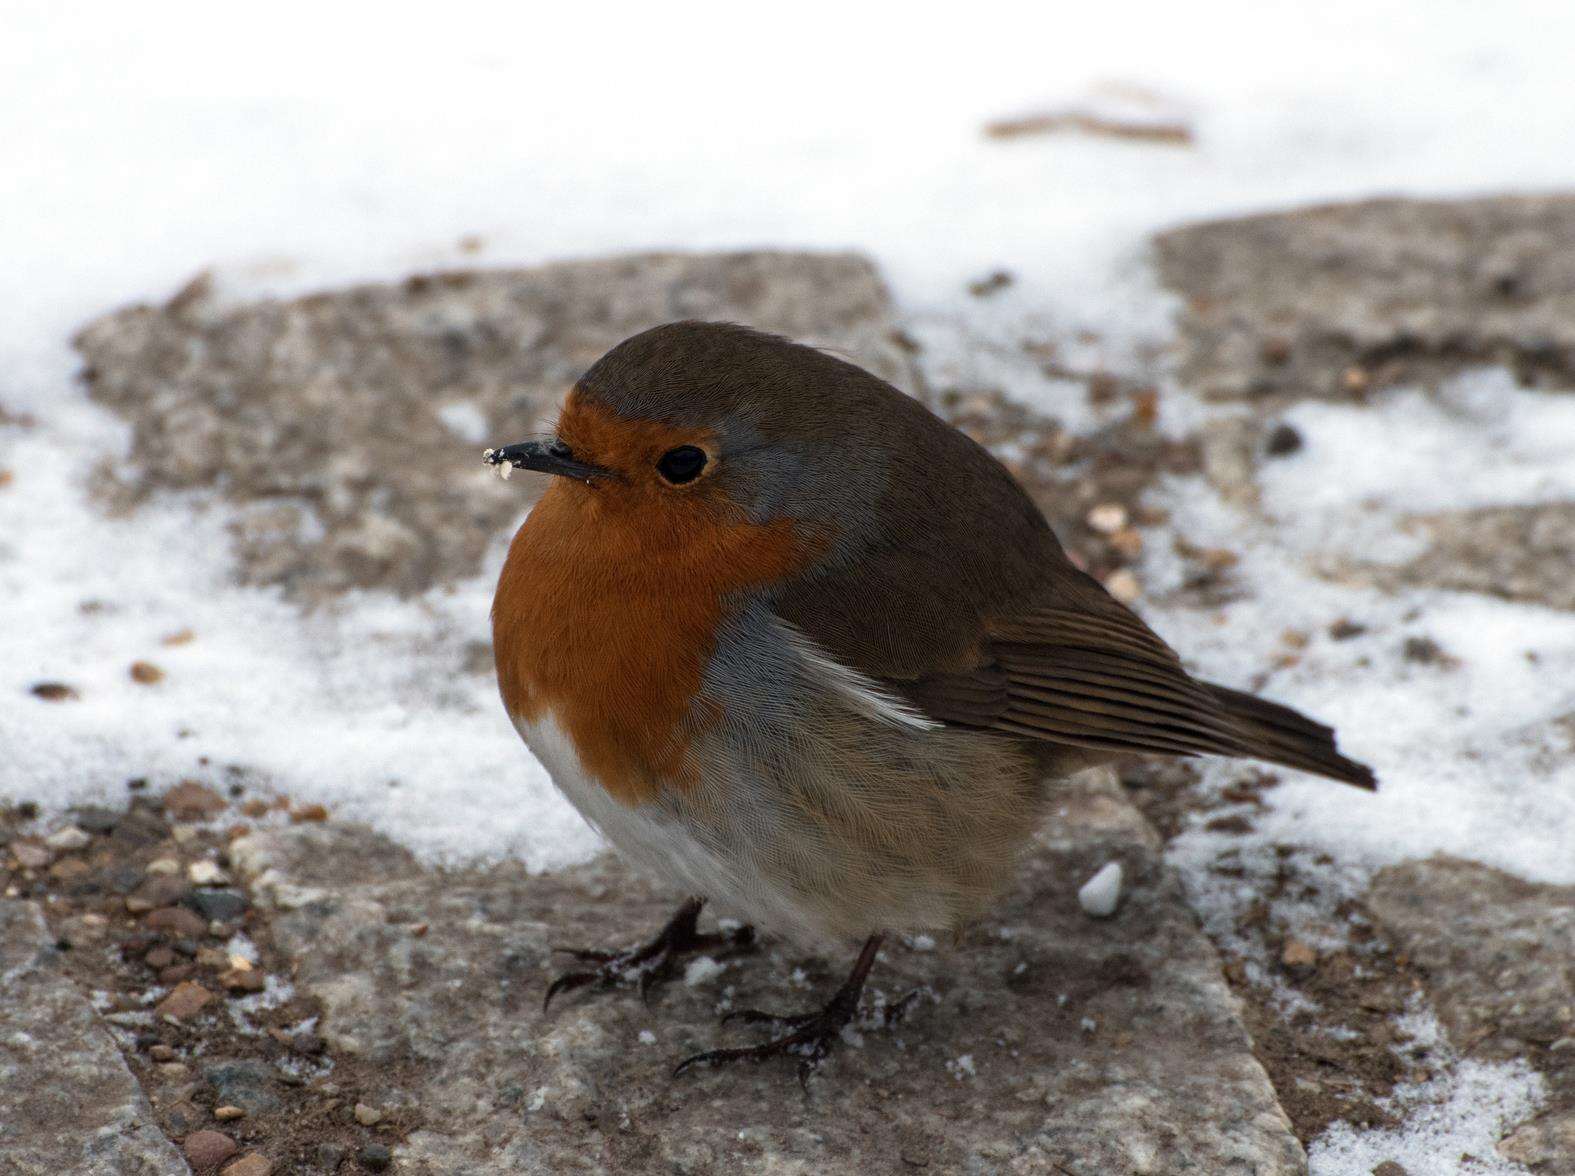 A Robin standing on a path with some snow in the county